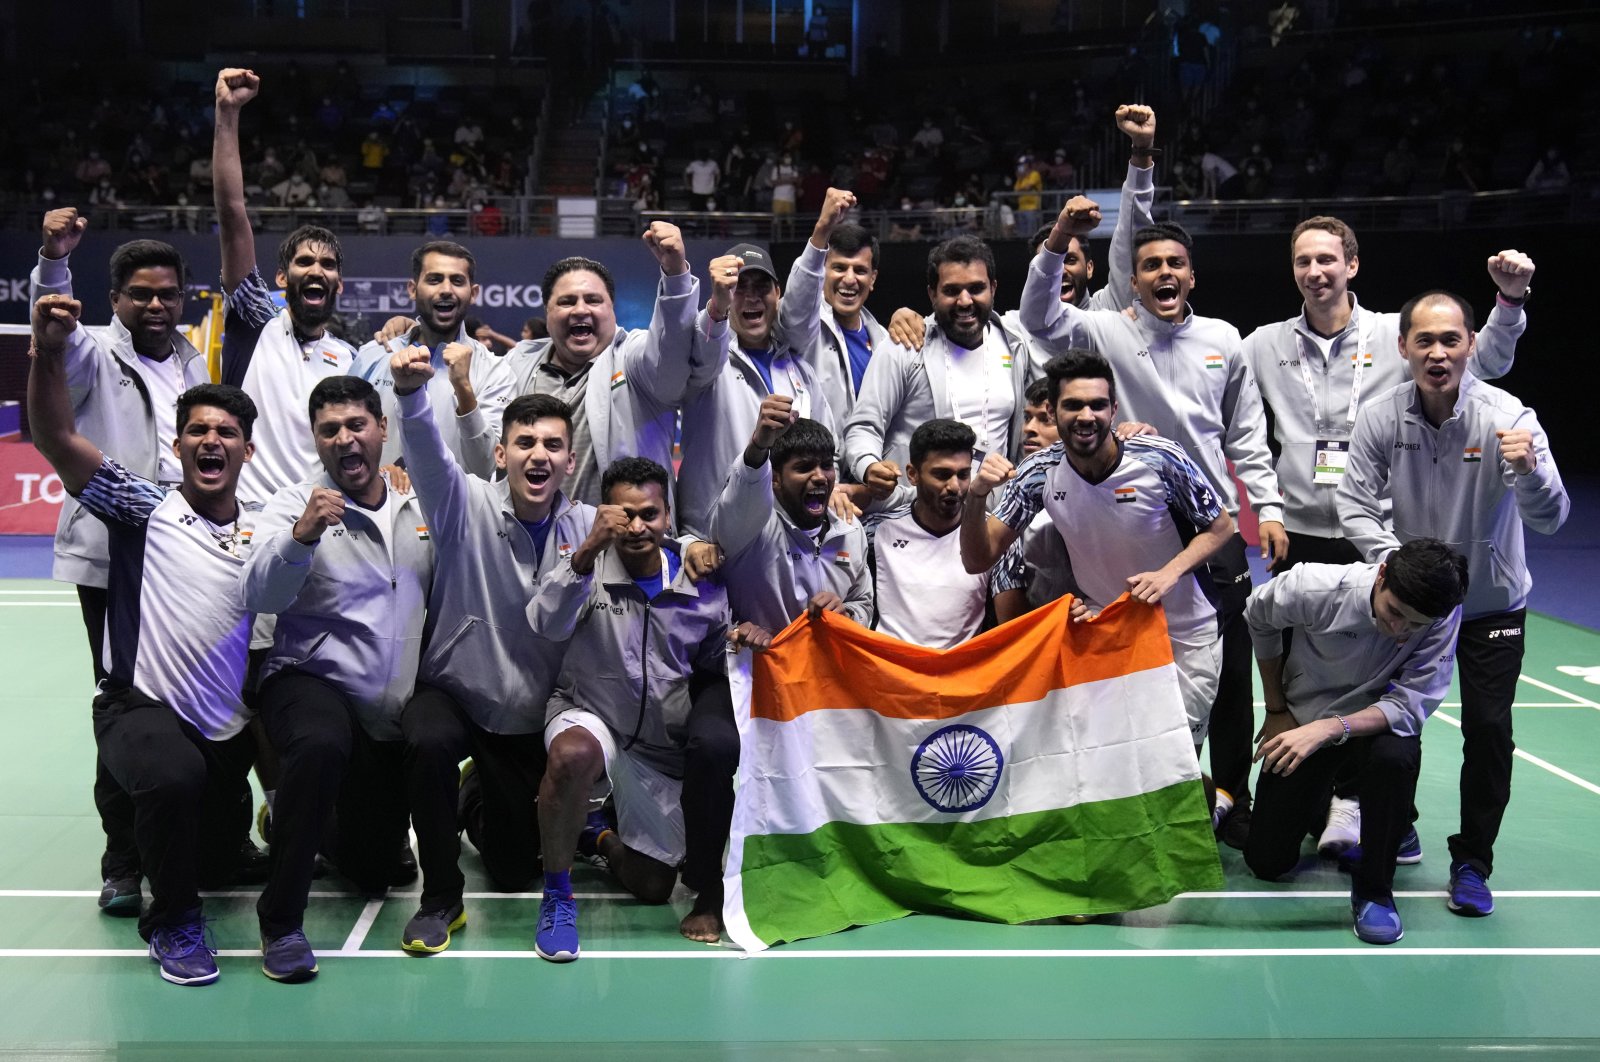 Members of the Indian team pose with the national flag after winning Thomas Cup title, Bangkok, Thailand, May 15, 2022. (AP Photo)